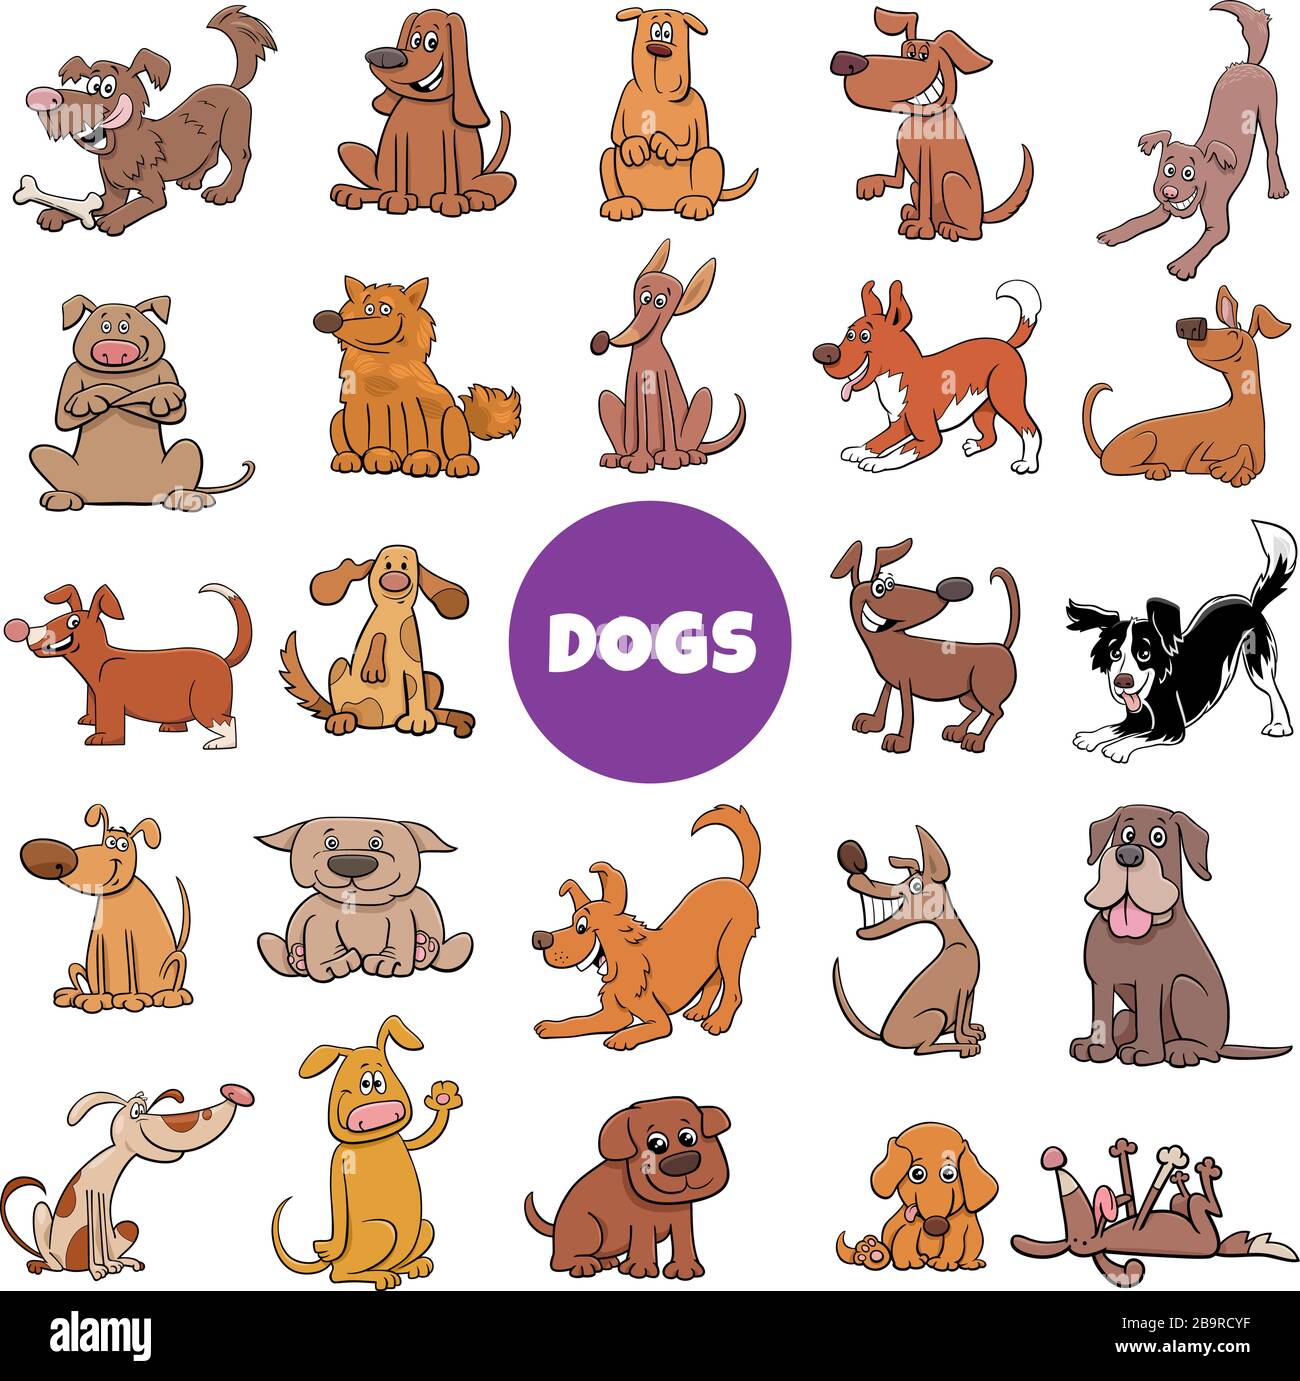 Cartoon Illustration of Dogs and Puppies Pet Animal Characters Large Set Stock Vector